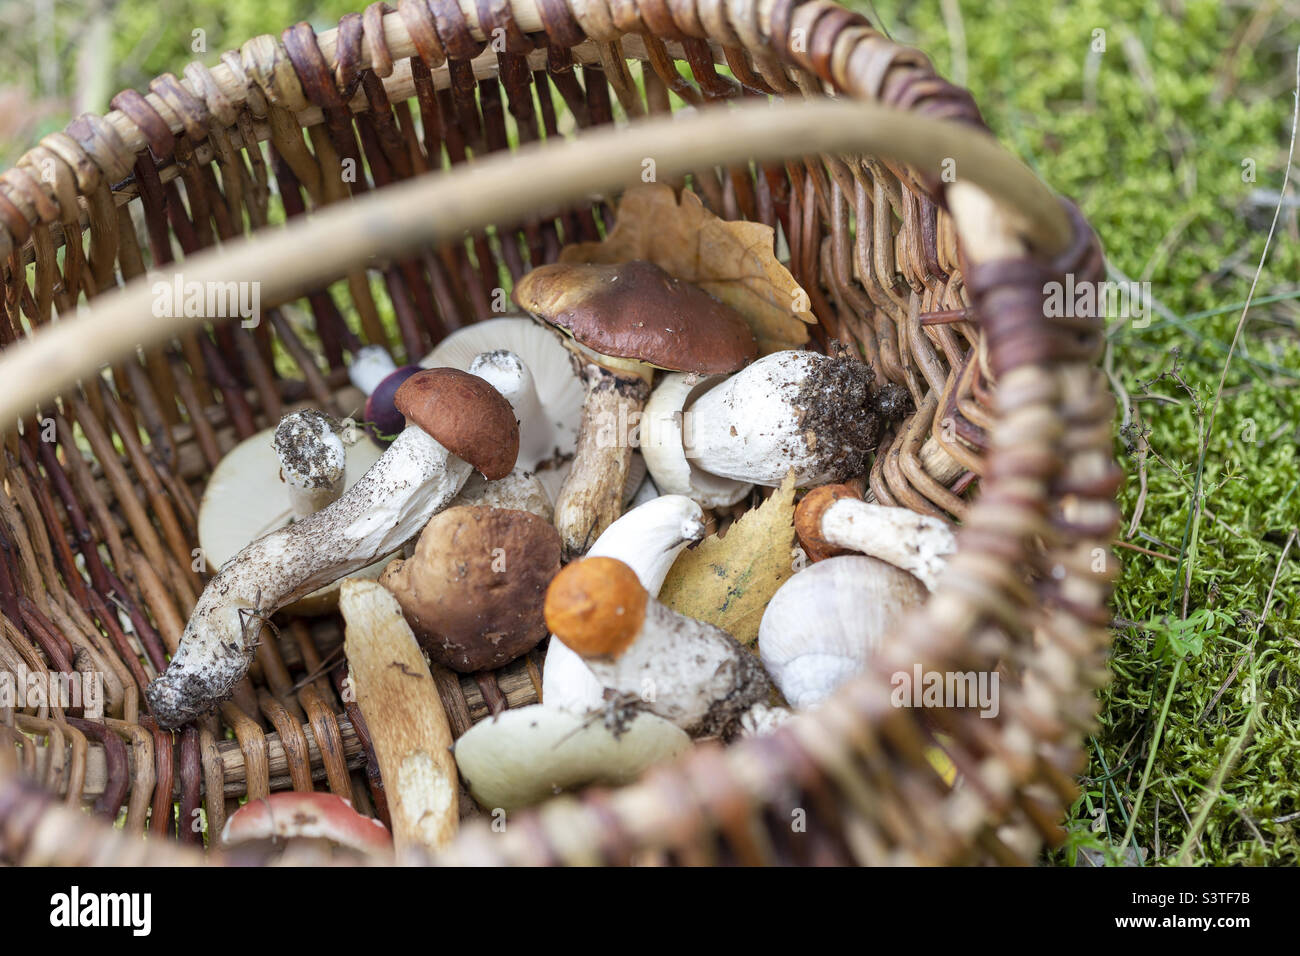 Basket of edible mushrooms, picked from the forest in autumn. Closeup. Stock Photo